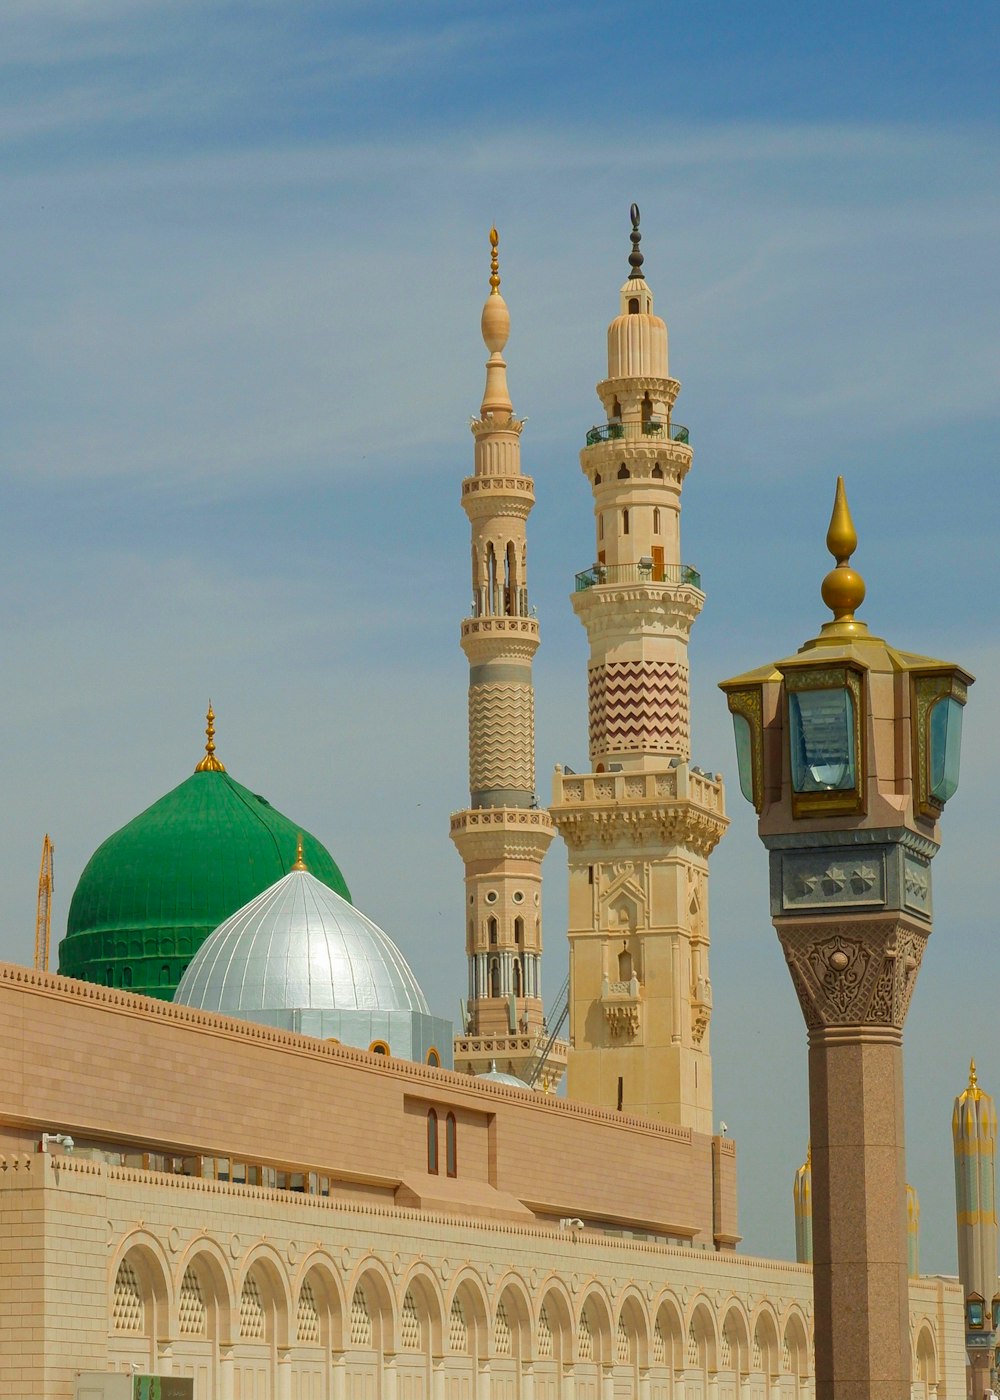 a large building with a green dome and a clock tower